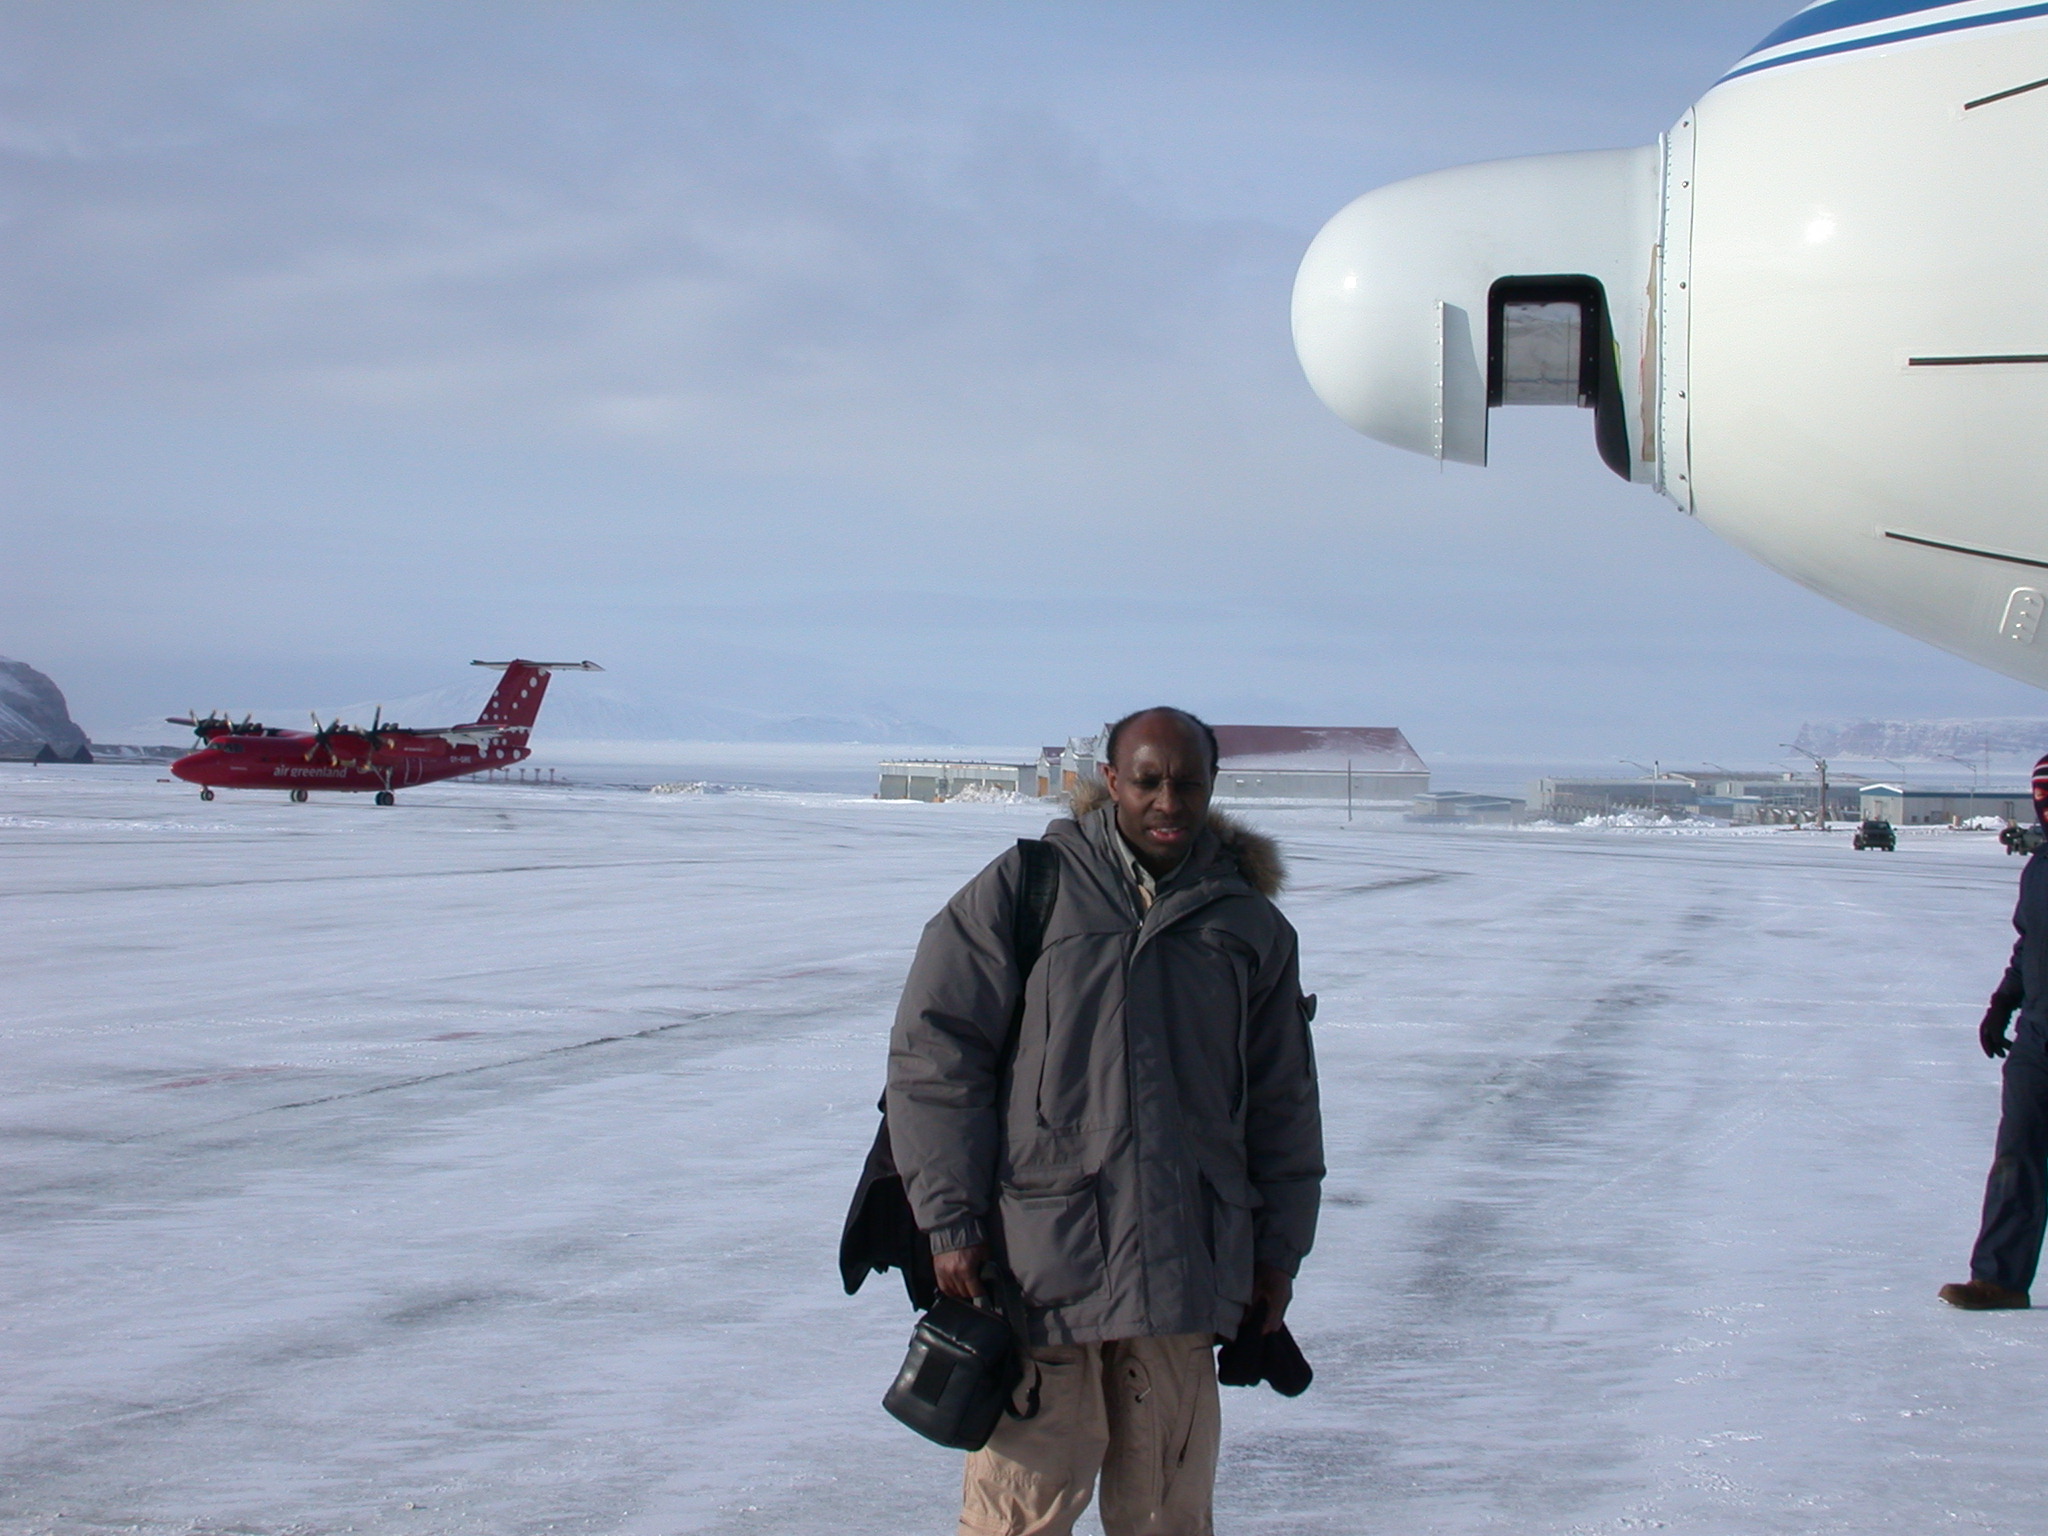 Gatebe at the Thule Air Base in Greenland